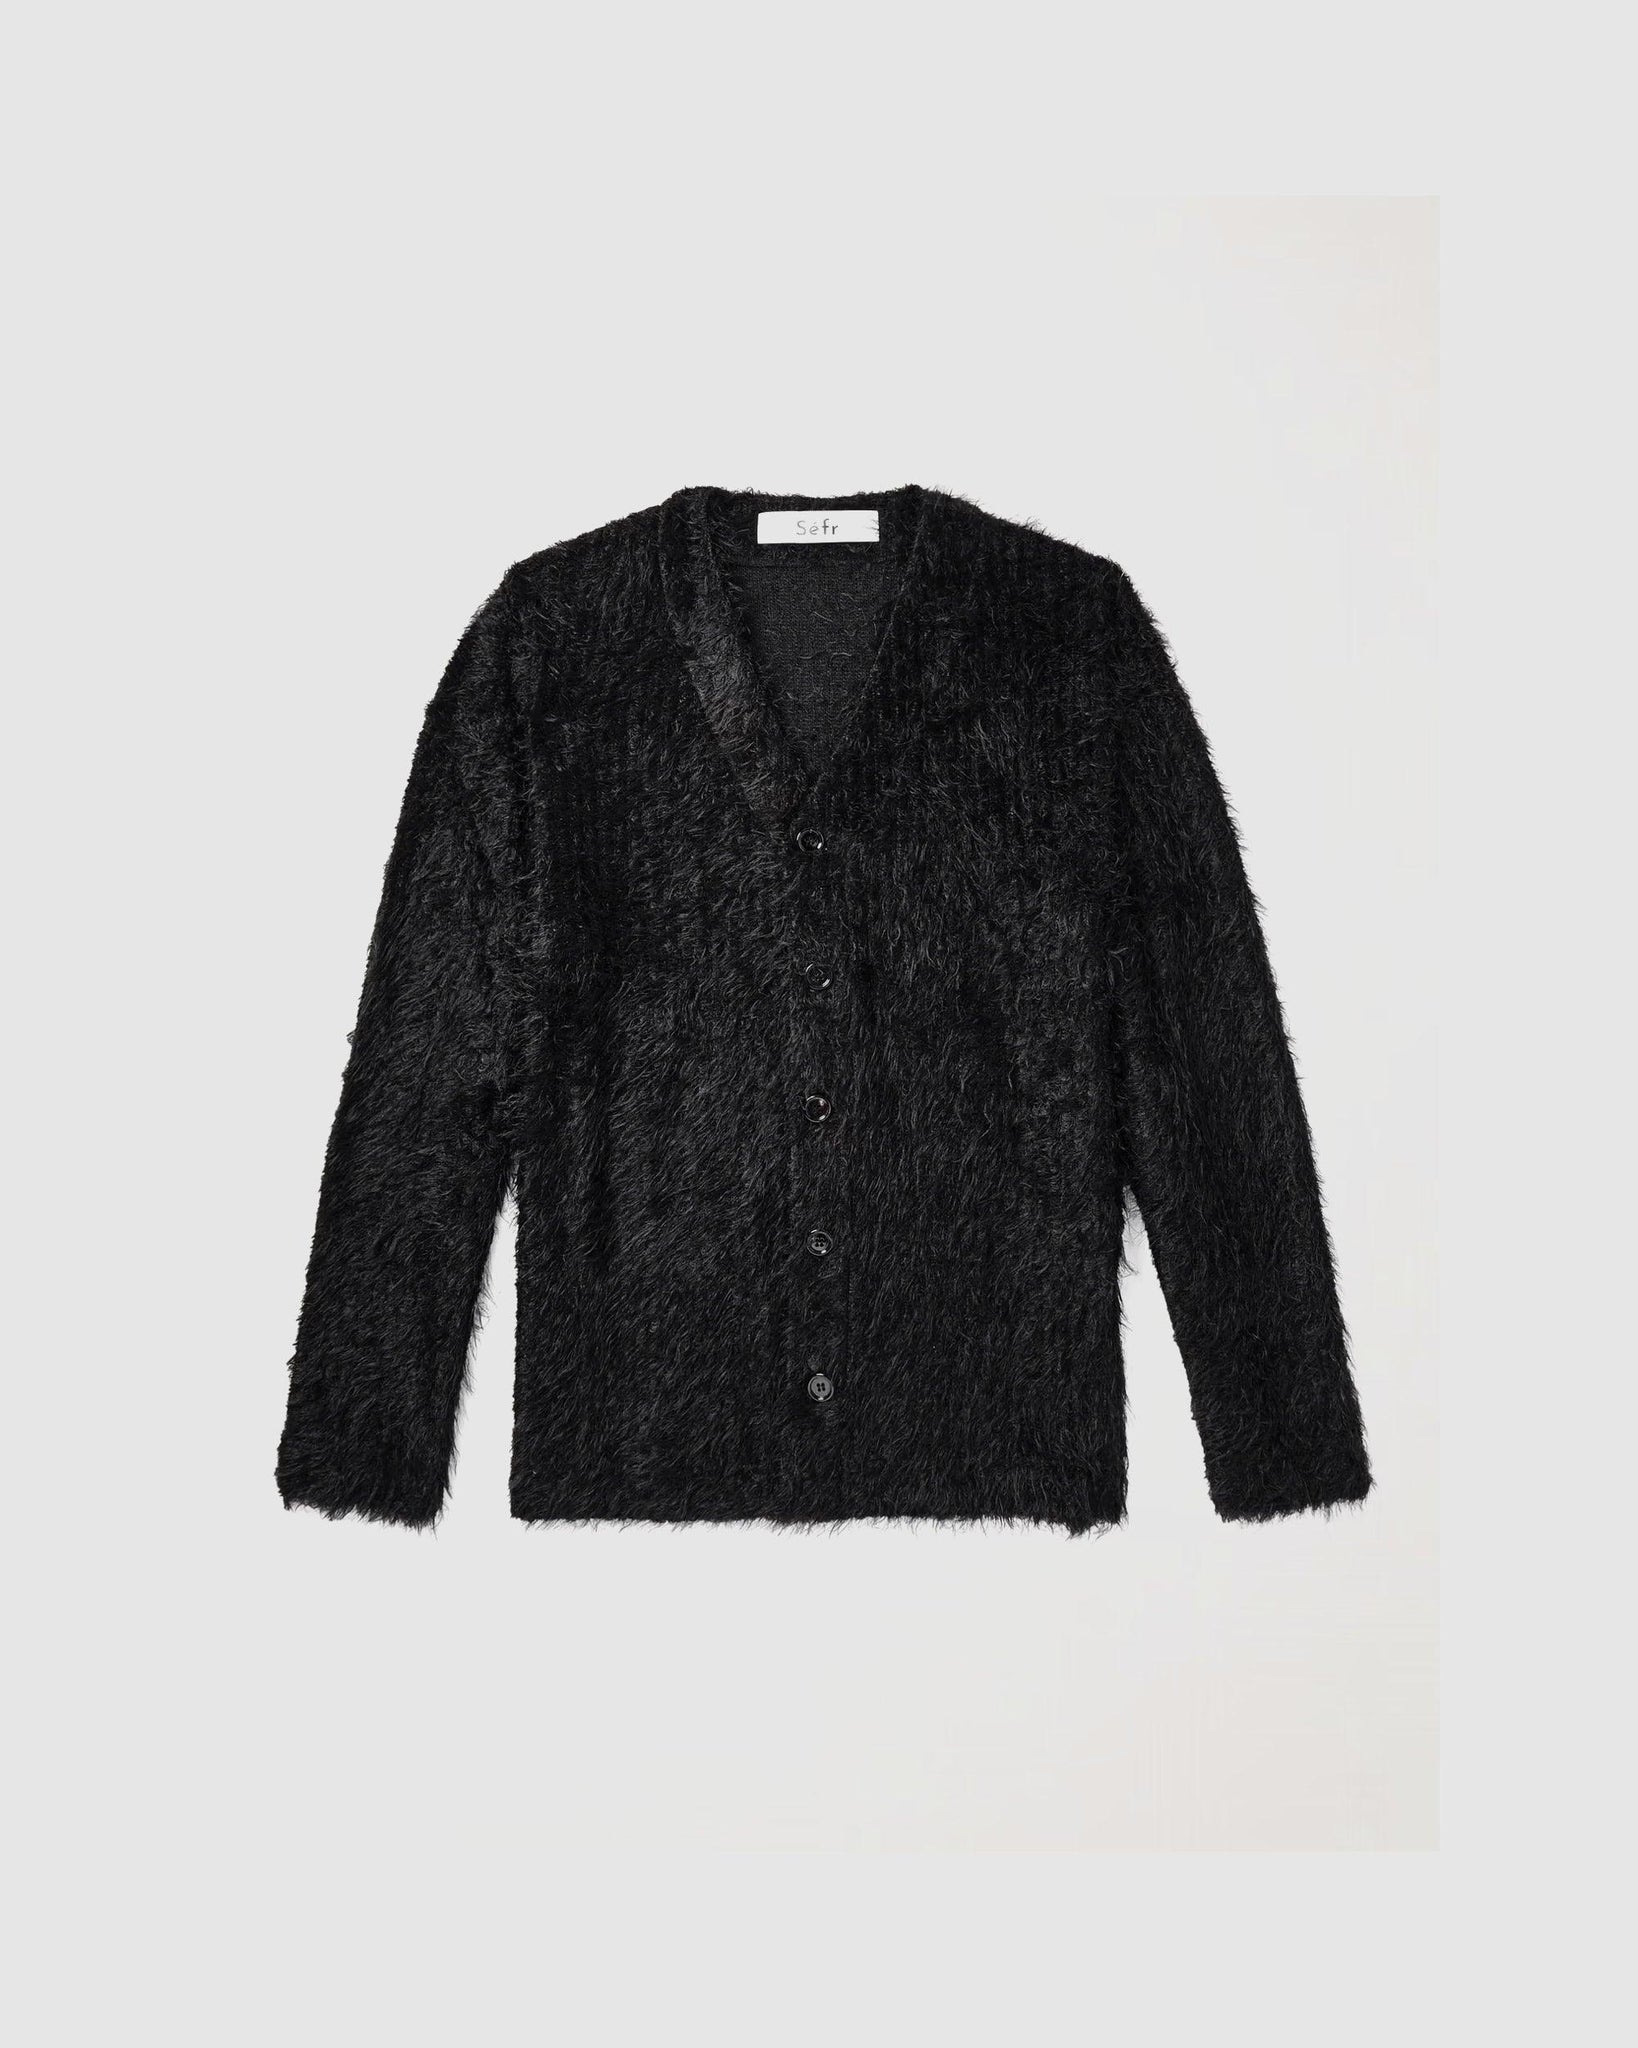 Osho Mohair Cardigan - {{ collection.title }} - Chinatown Country Club 